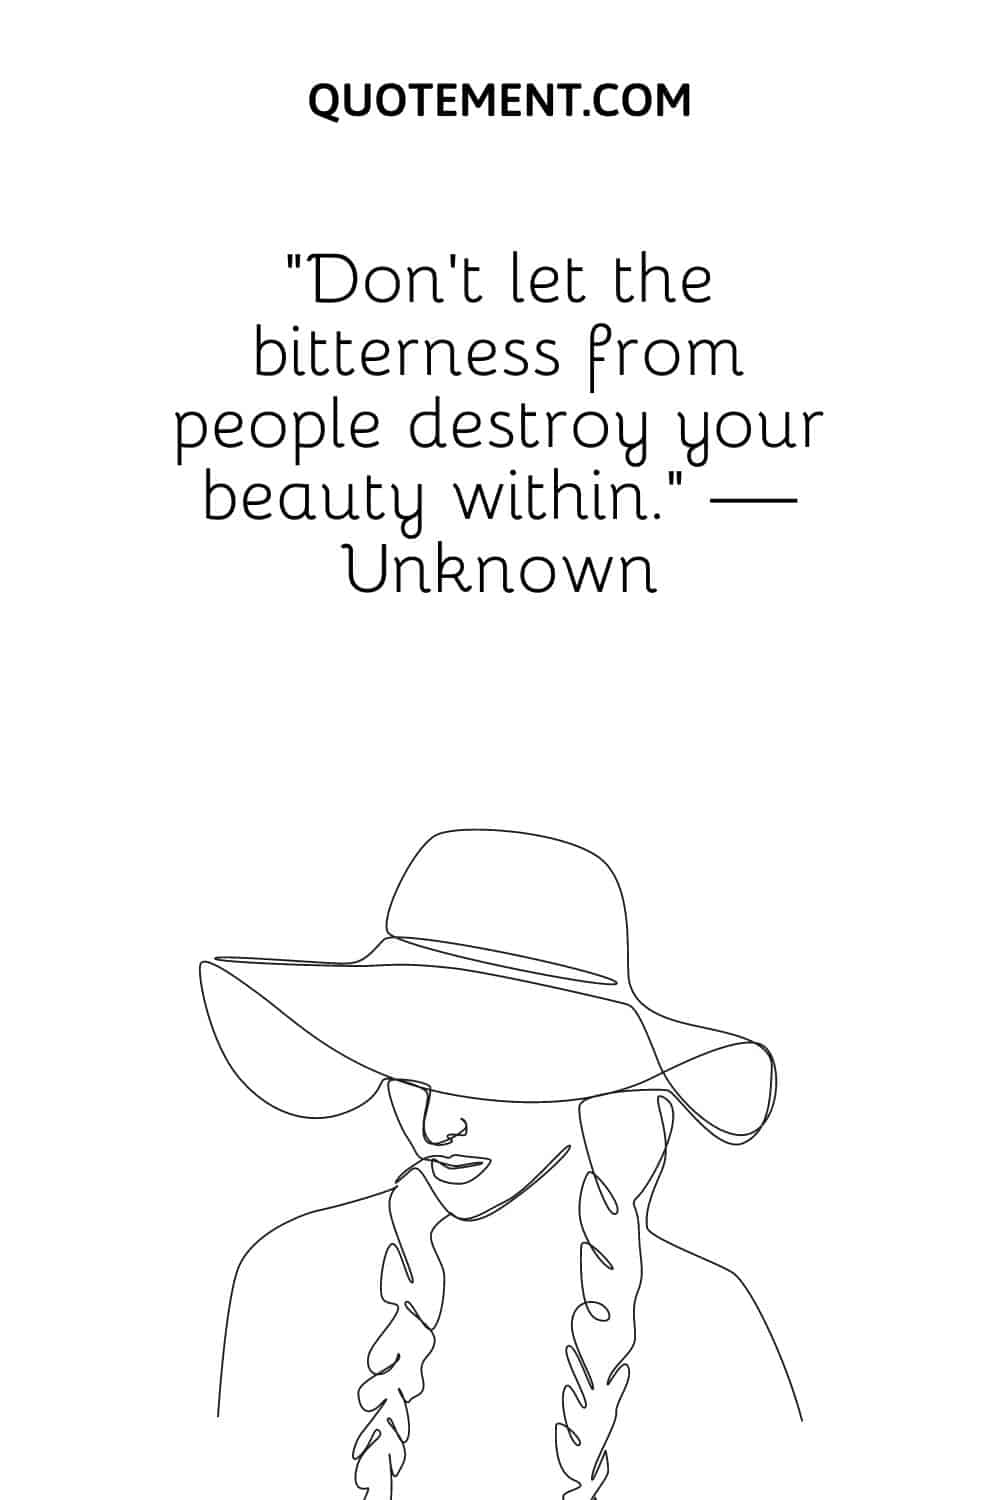 Don’t let the bitterness from people destroy your beauty within